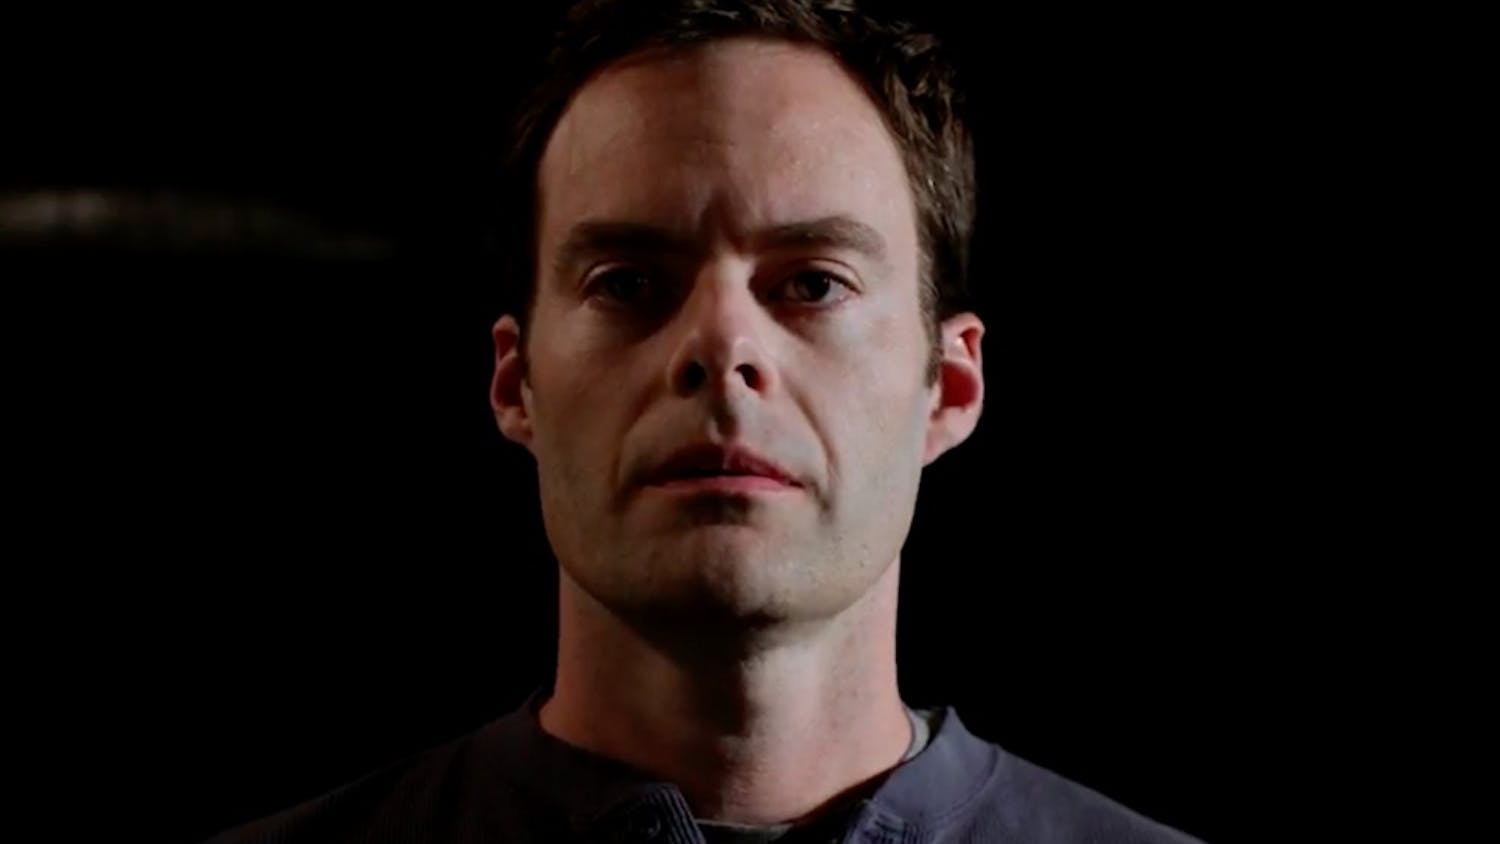 Bill Hader in HBO's "Barry." The show combines intellect and humor with darker themes as it follows a protagonist who struggles to find happiness and fulfillment.